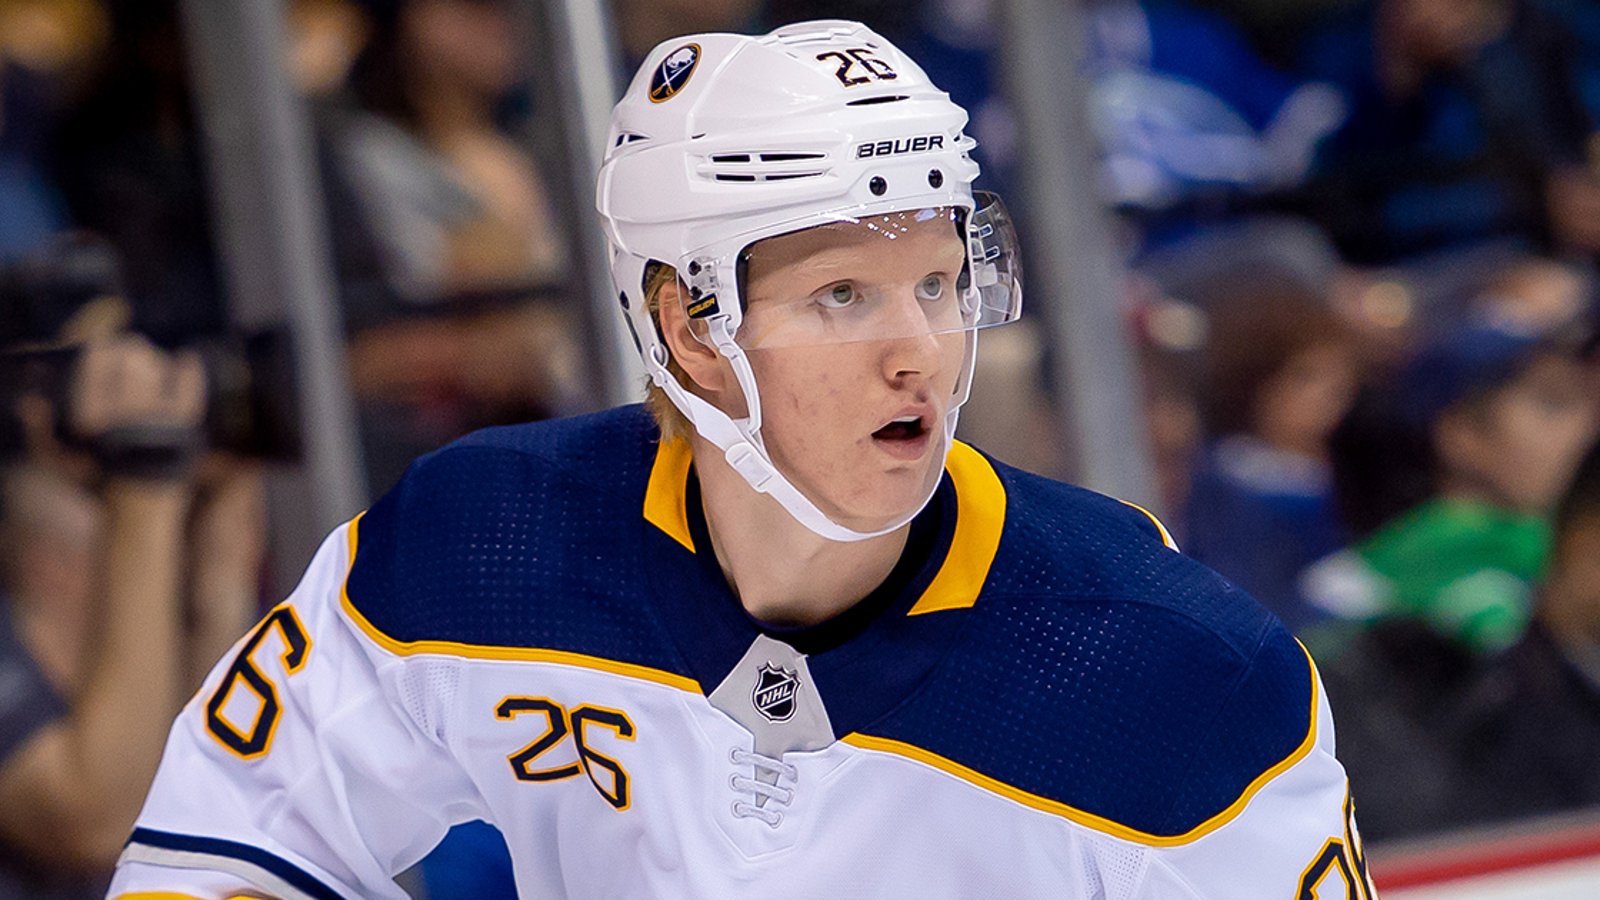 Dahlin slams Leafs when asked where he’d like to be traded